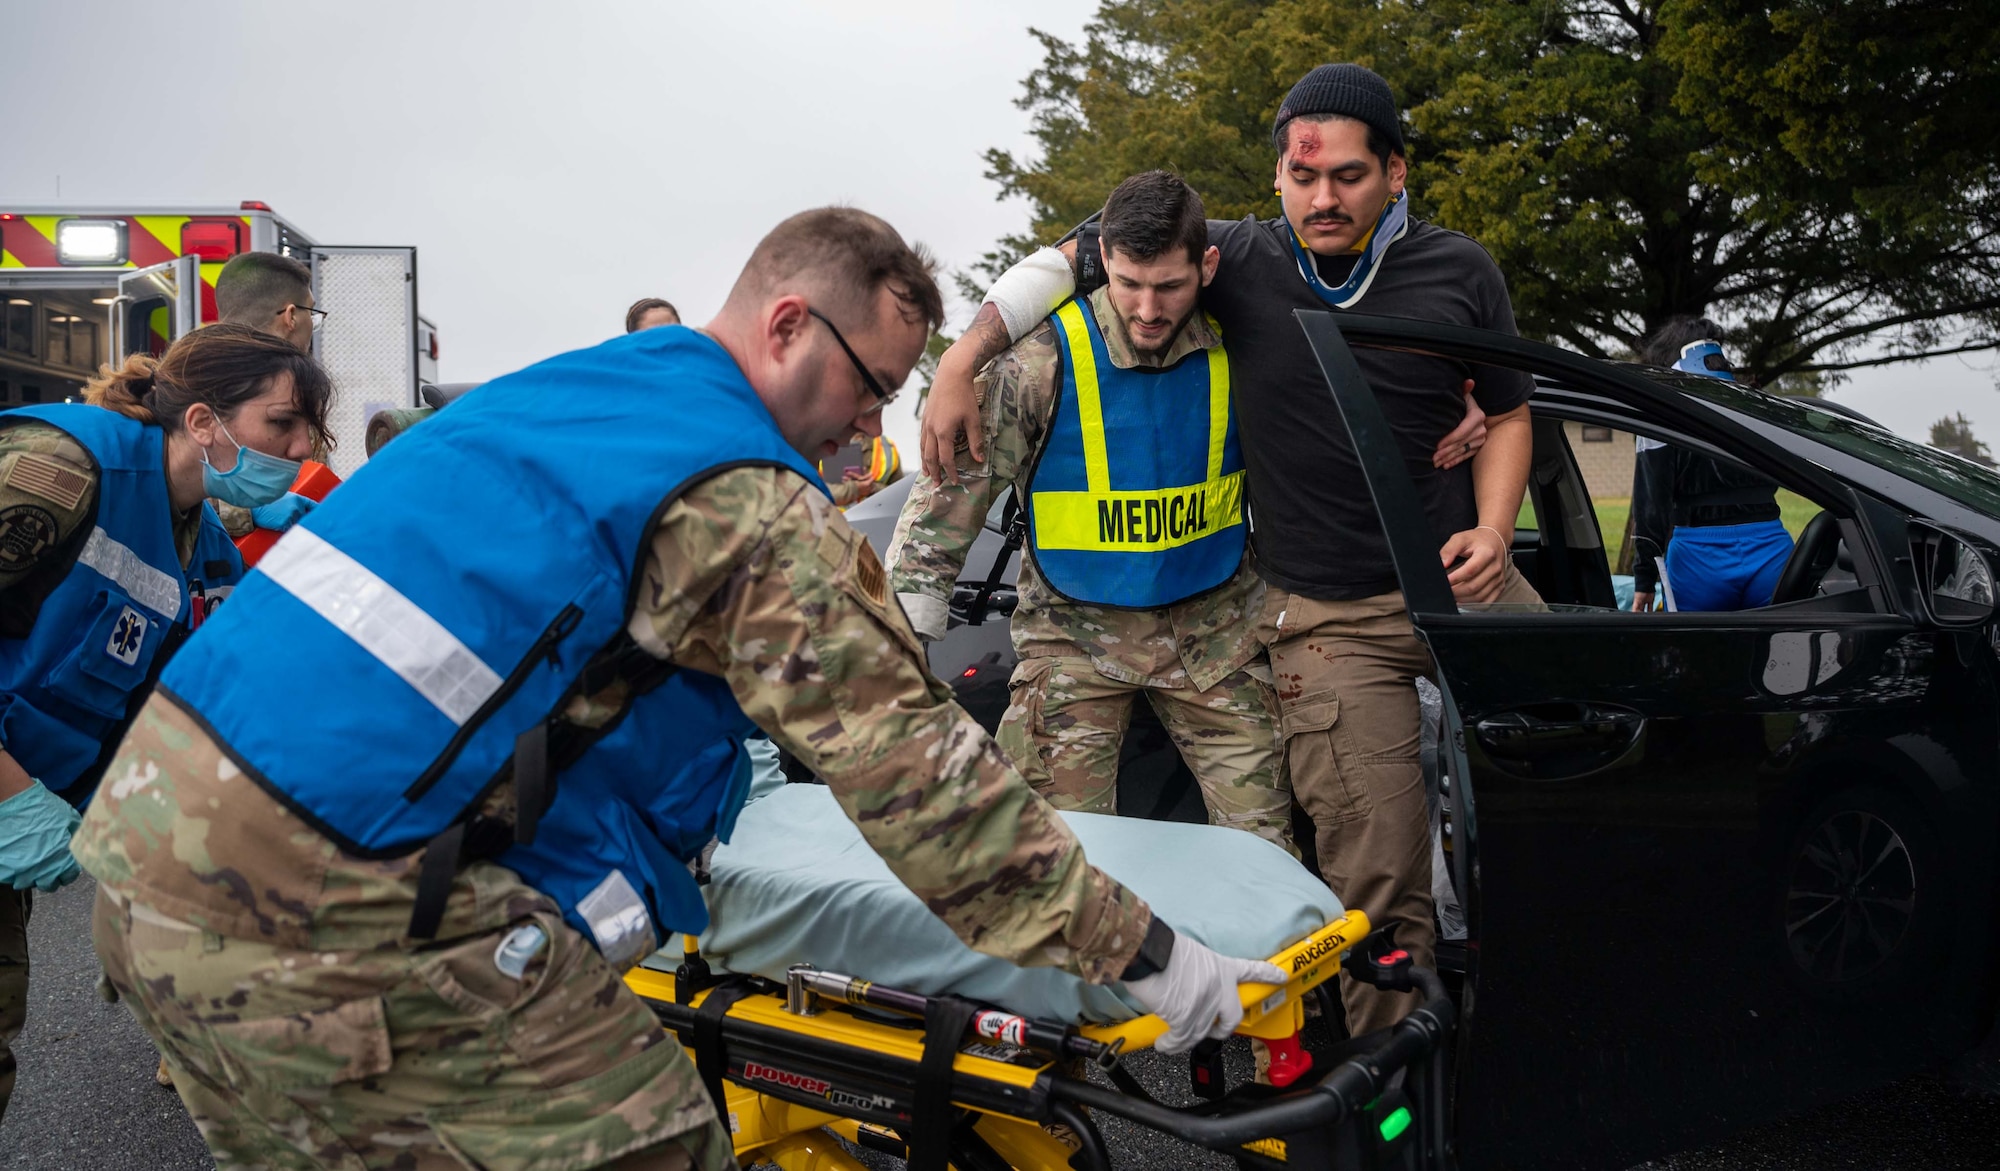 Members from the 436th Operational Medical Readiness Squadron ambulance response team, assist a simulated car crash victim during a major accident response exercise at Dover Air Force Base, Delaware, Dec. 7, 2022. The three-day exercise tested the response capabilities of Team Dover through various scenarios in an effort to strengthen their ability to provide rapid-global mobility in challenging conditions. (U.S. Air Force photo by Senior Airman Faith Barron)